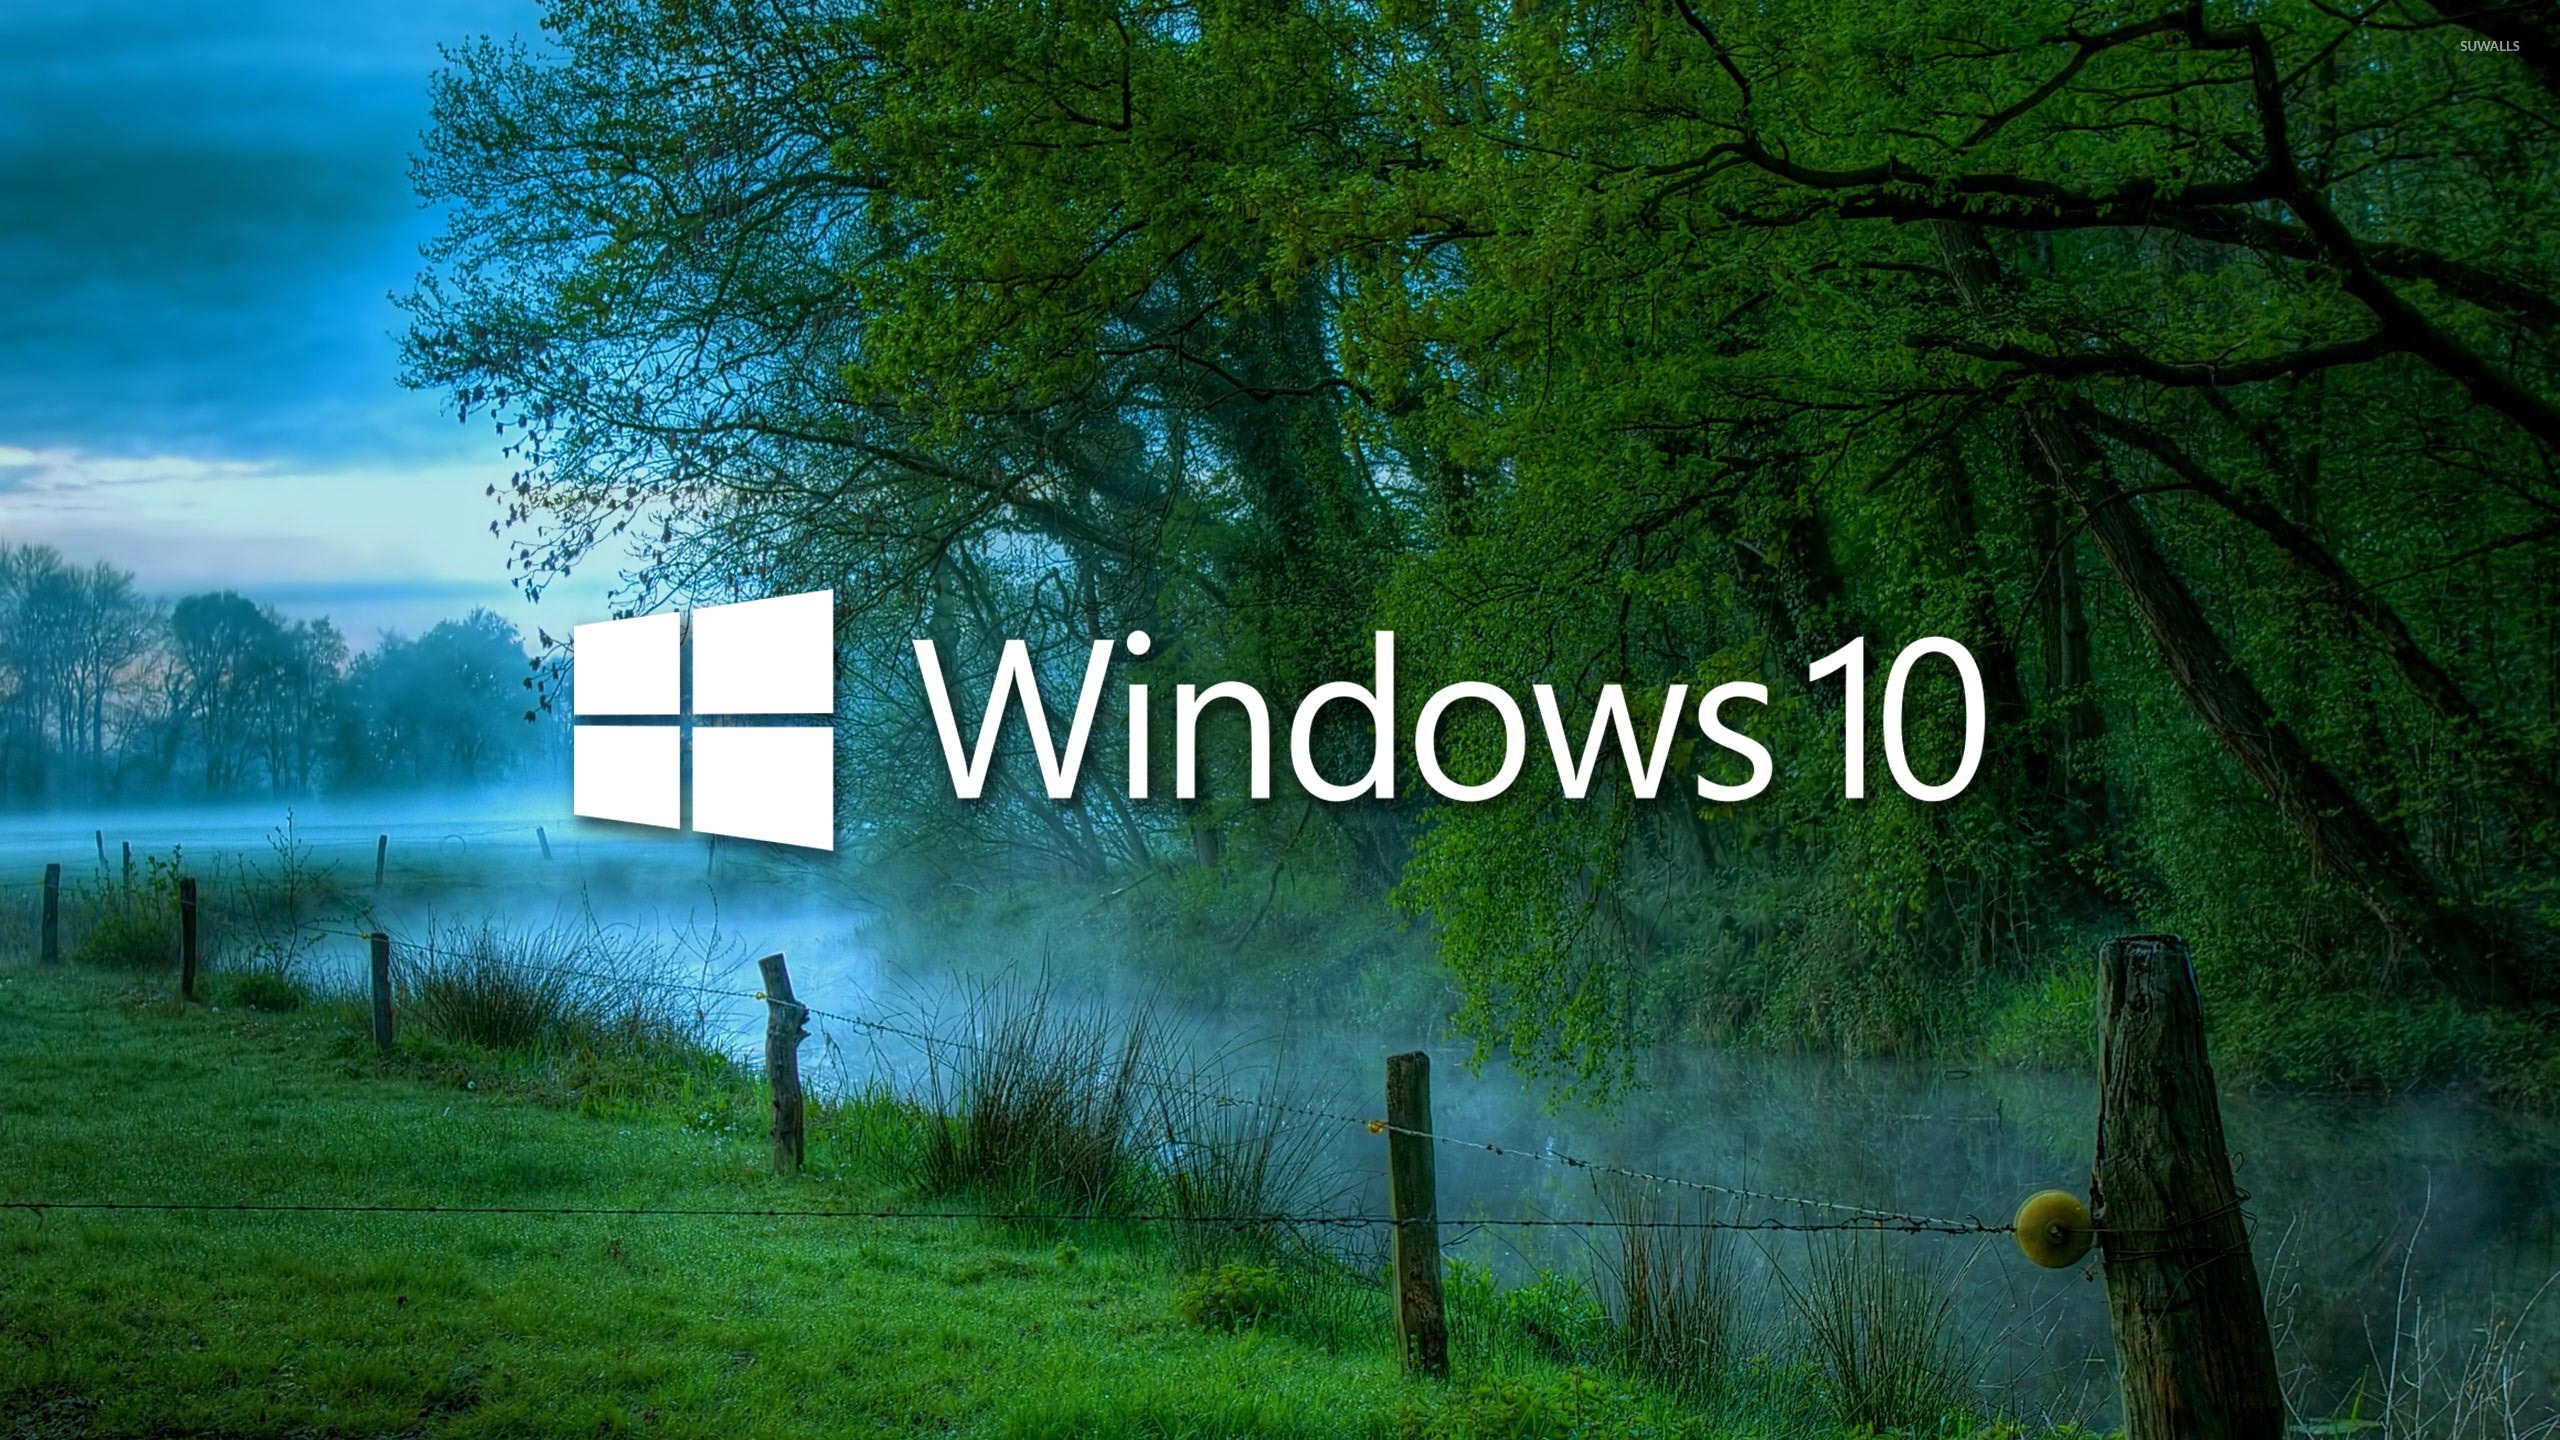 Windows 10 in the misty morning logo with text wallpaper - Computer ...